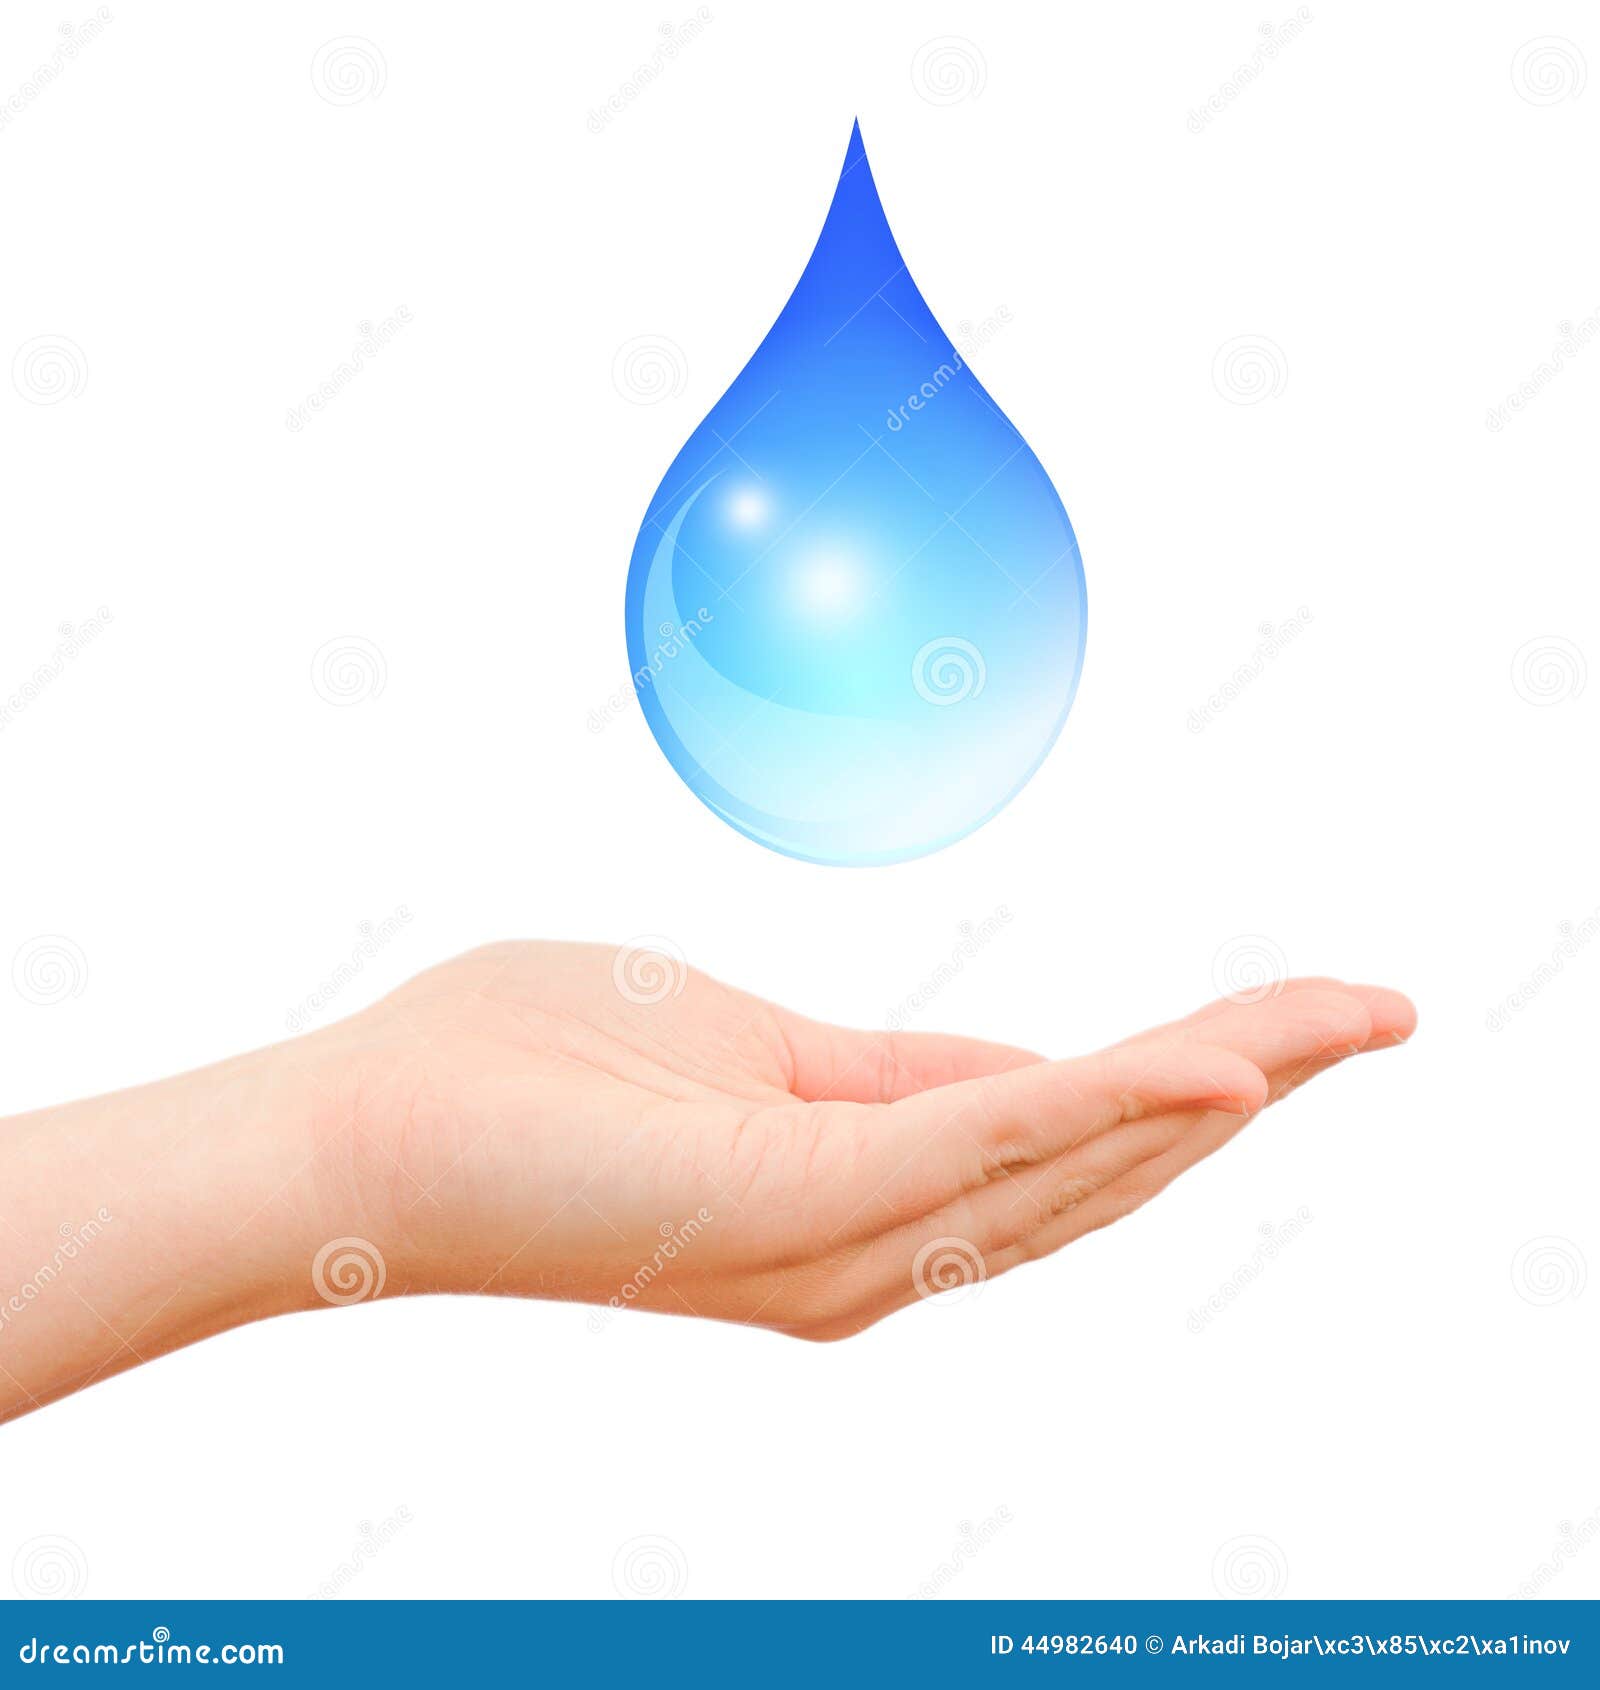 Save water symbol stock photo. Image of bright, background - 44982640